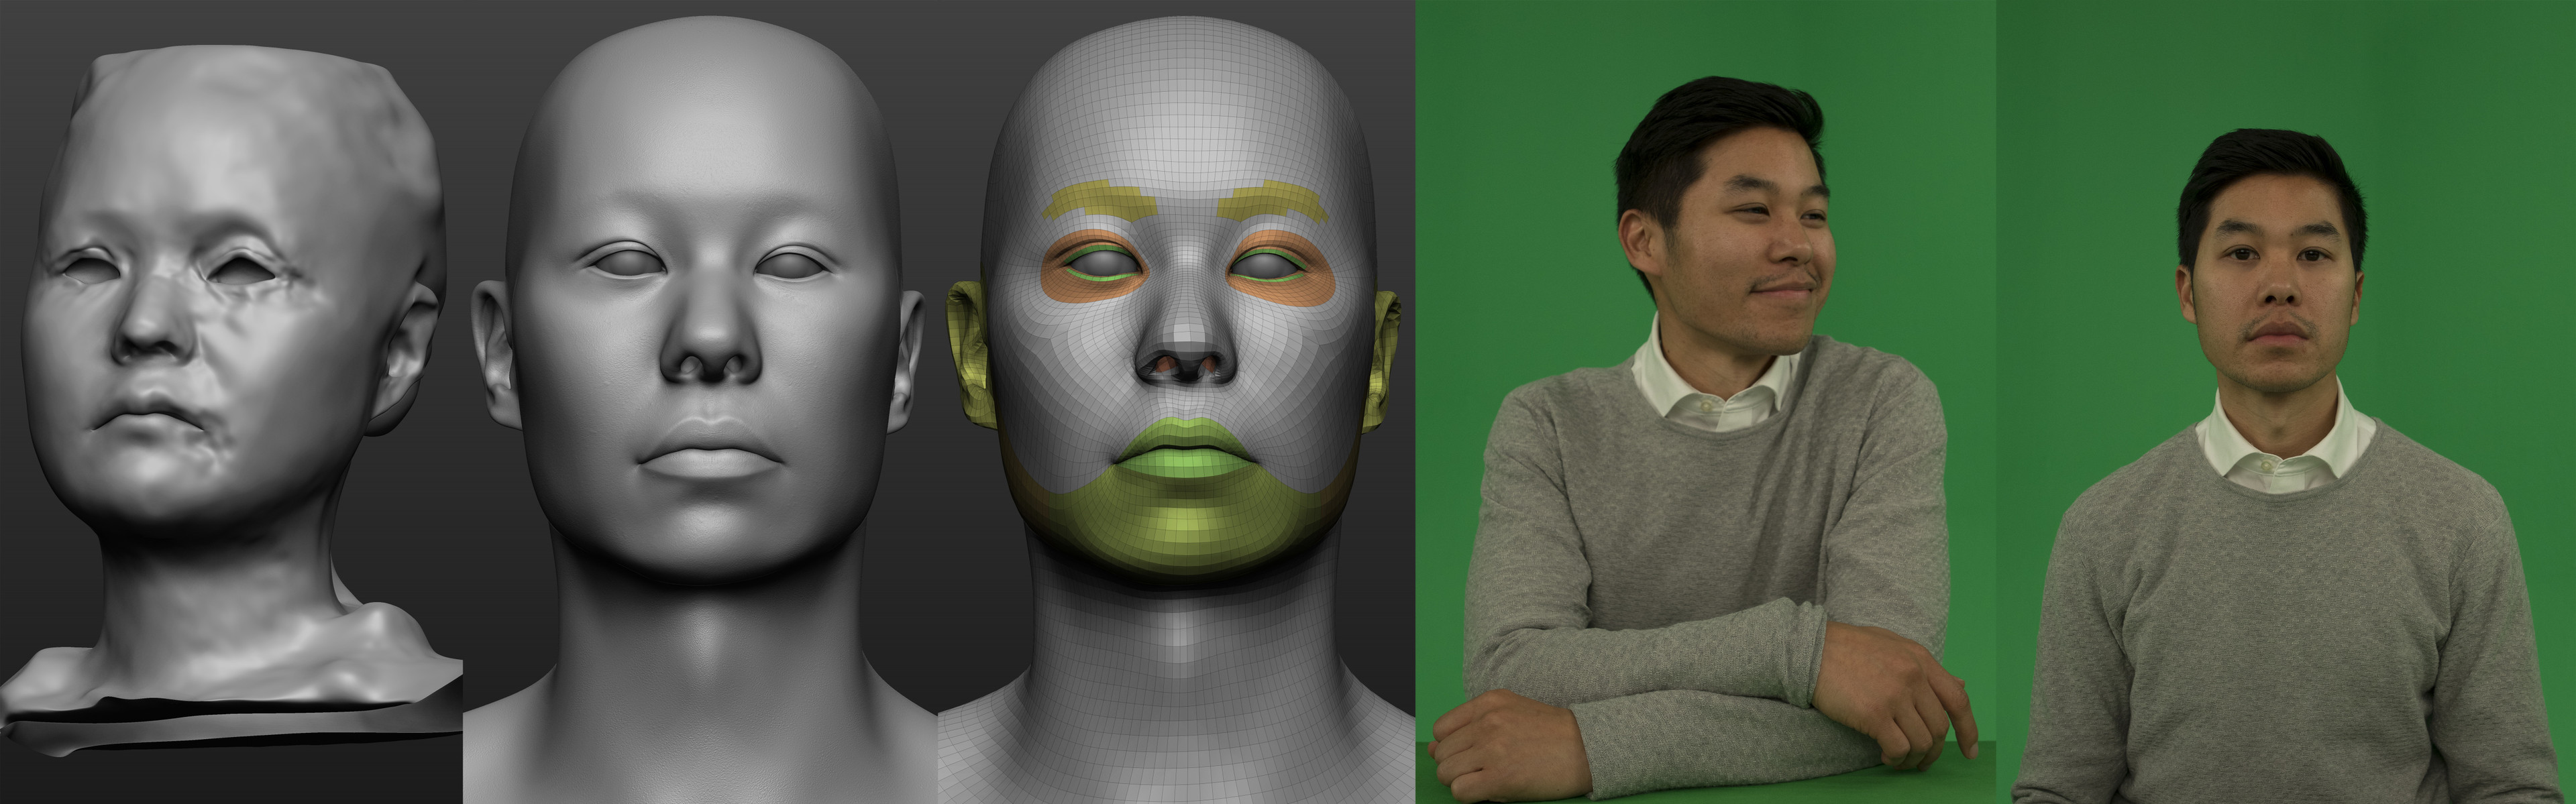 CR1-0057 Scan, Topology, Zbrush Details &amp; Reference [ Higher Quality Breakdown here: https://bit.ly/2N2edyt ]